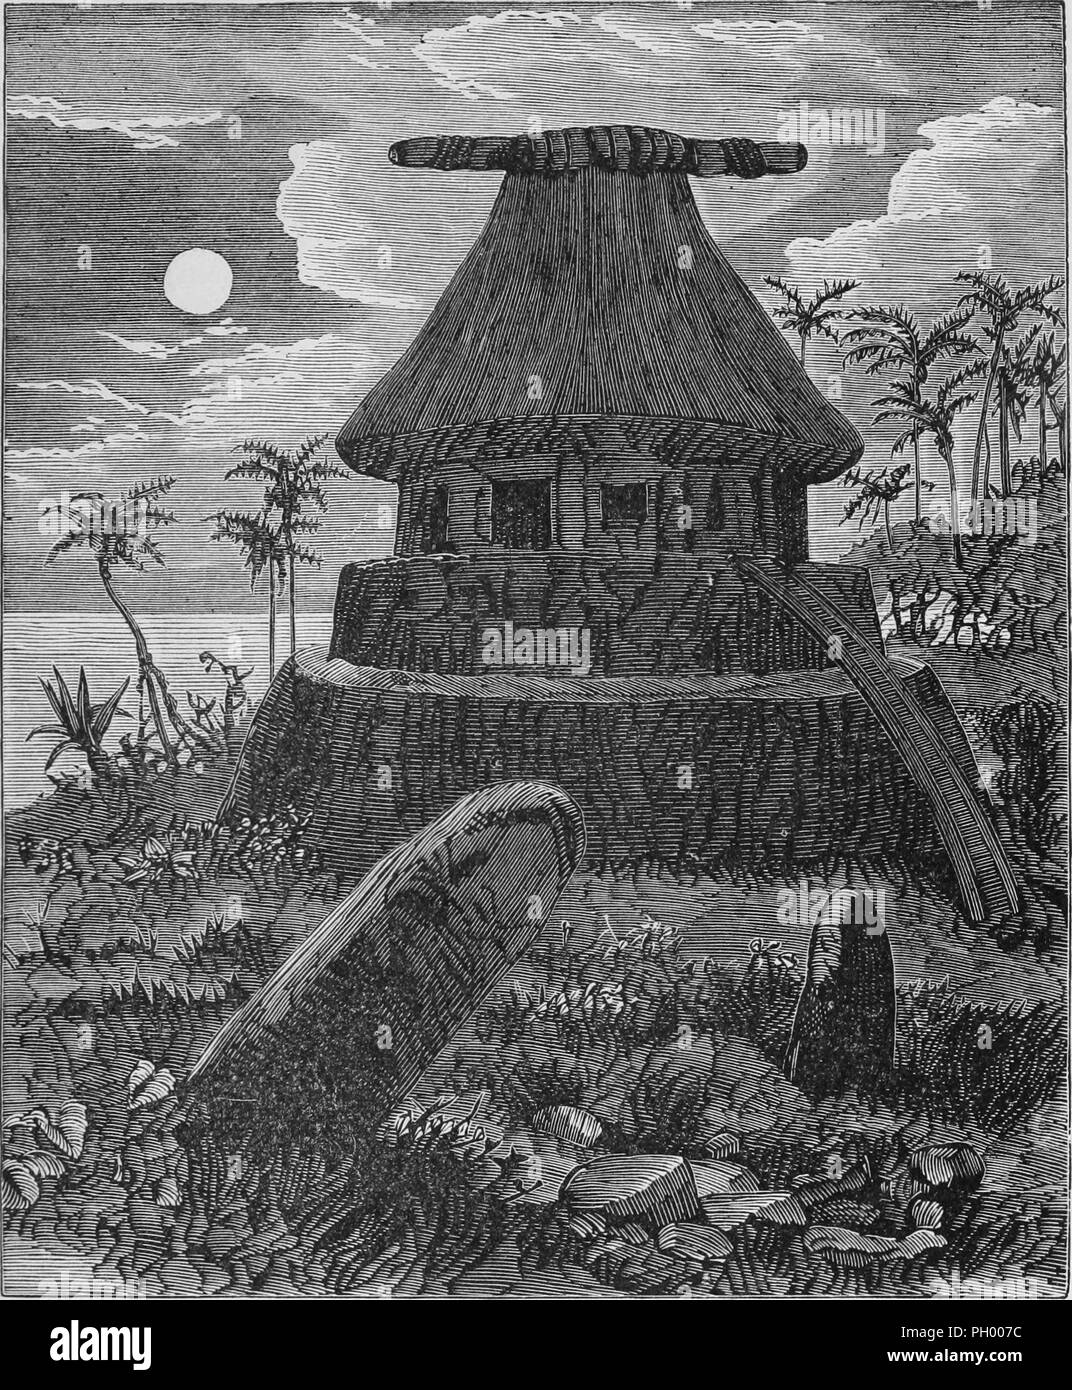 Black and white vintage print, depicting a pre-colonial Fijian temple or bure, a cylindrical structure, erected on an elevated site, and crafted from elaborately woven strands of Magimagi or sennit, located in Fiji, published in John George Wood's volume 'The uncivilized races of men in all countries of the world, being a comprehensive account of their manners and customs, and of their physical, social, mental, moral and religious characteristics', 1877. Courtesy Internet Archive. () Stock Photo